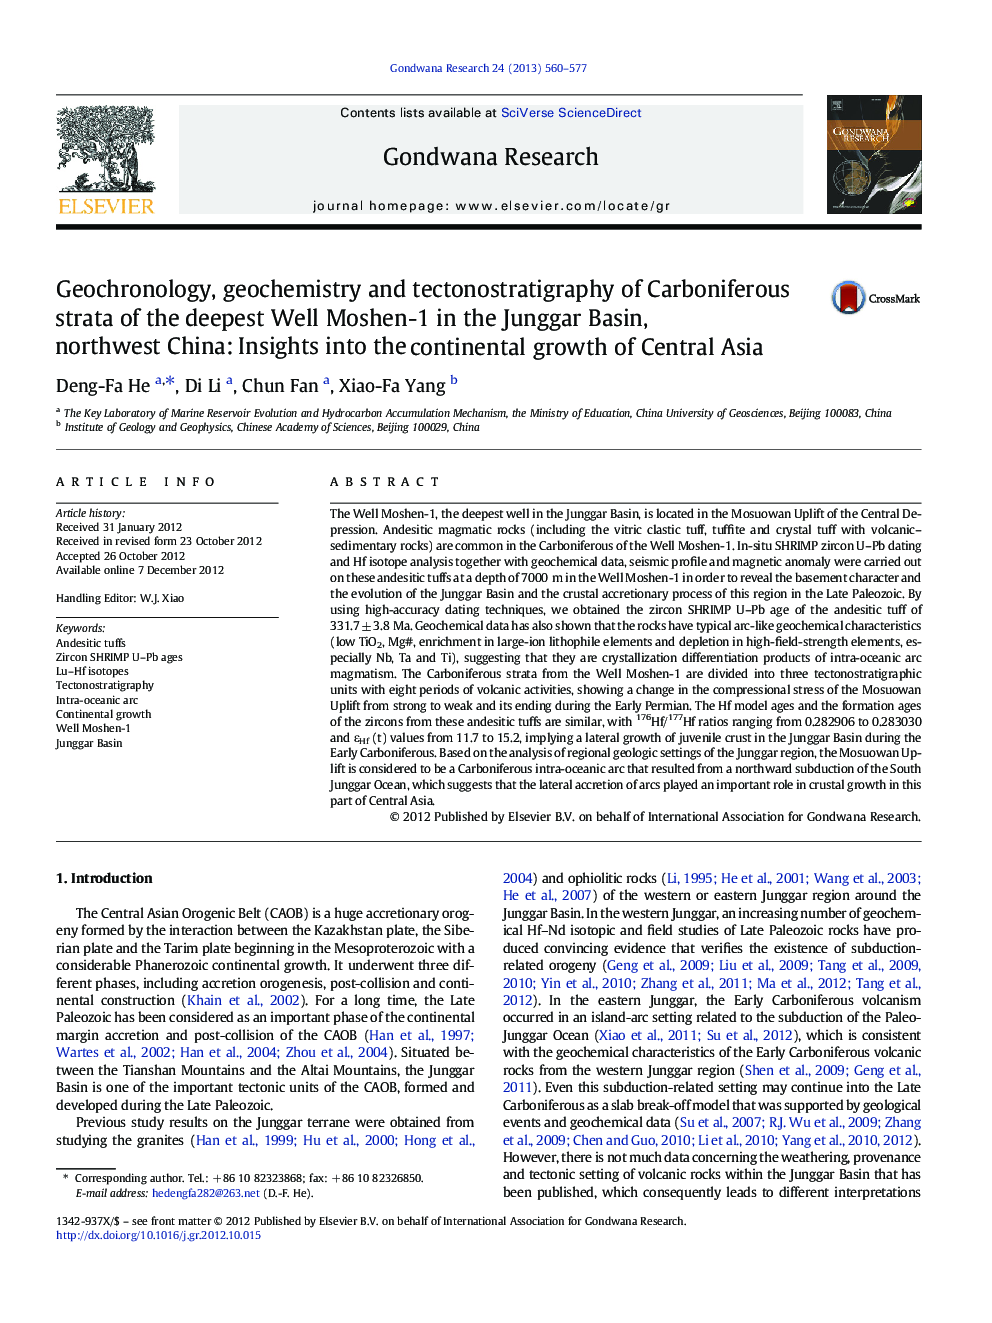 Geochronology, geochemistry and tectonostratigraphy of Carboniferous strata of the deepest Well Moshen-1 in the Junggar Basin, northwest China: Insights into the continental growth of Central Asia